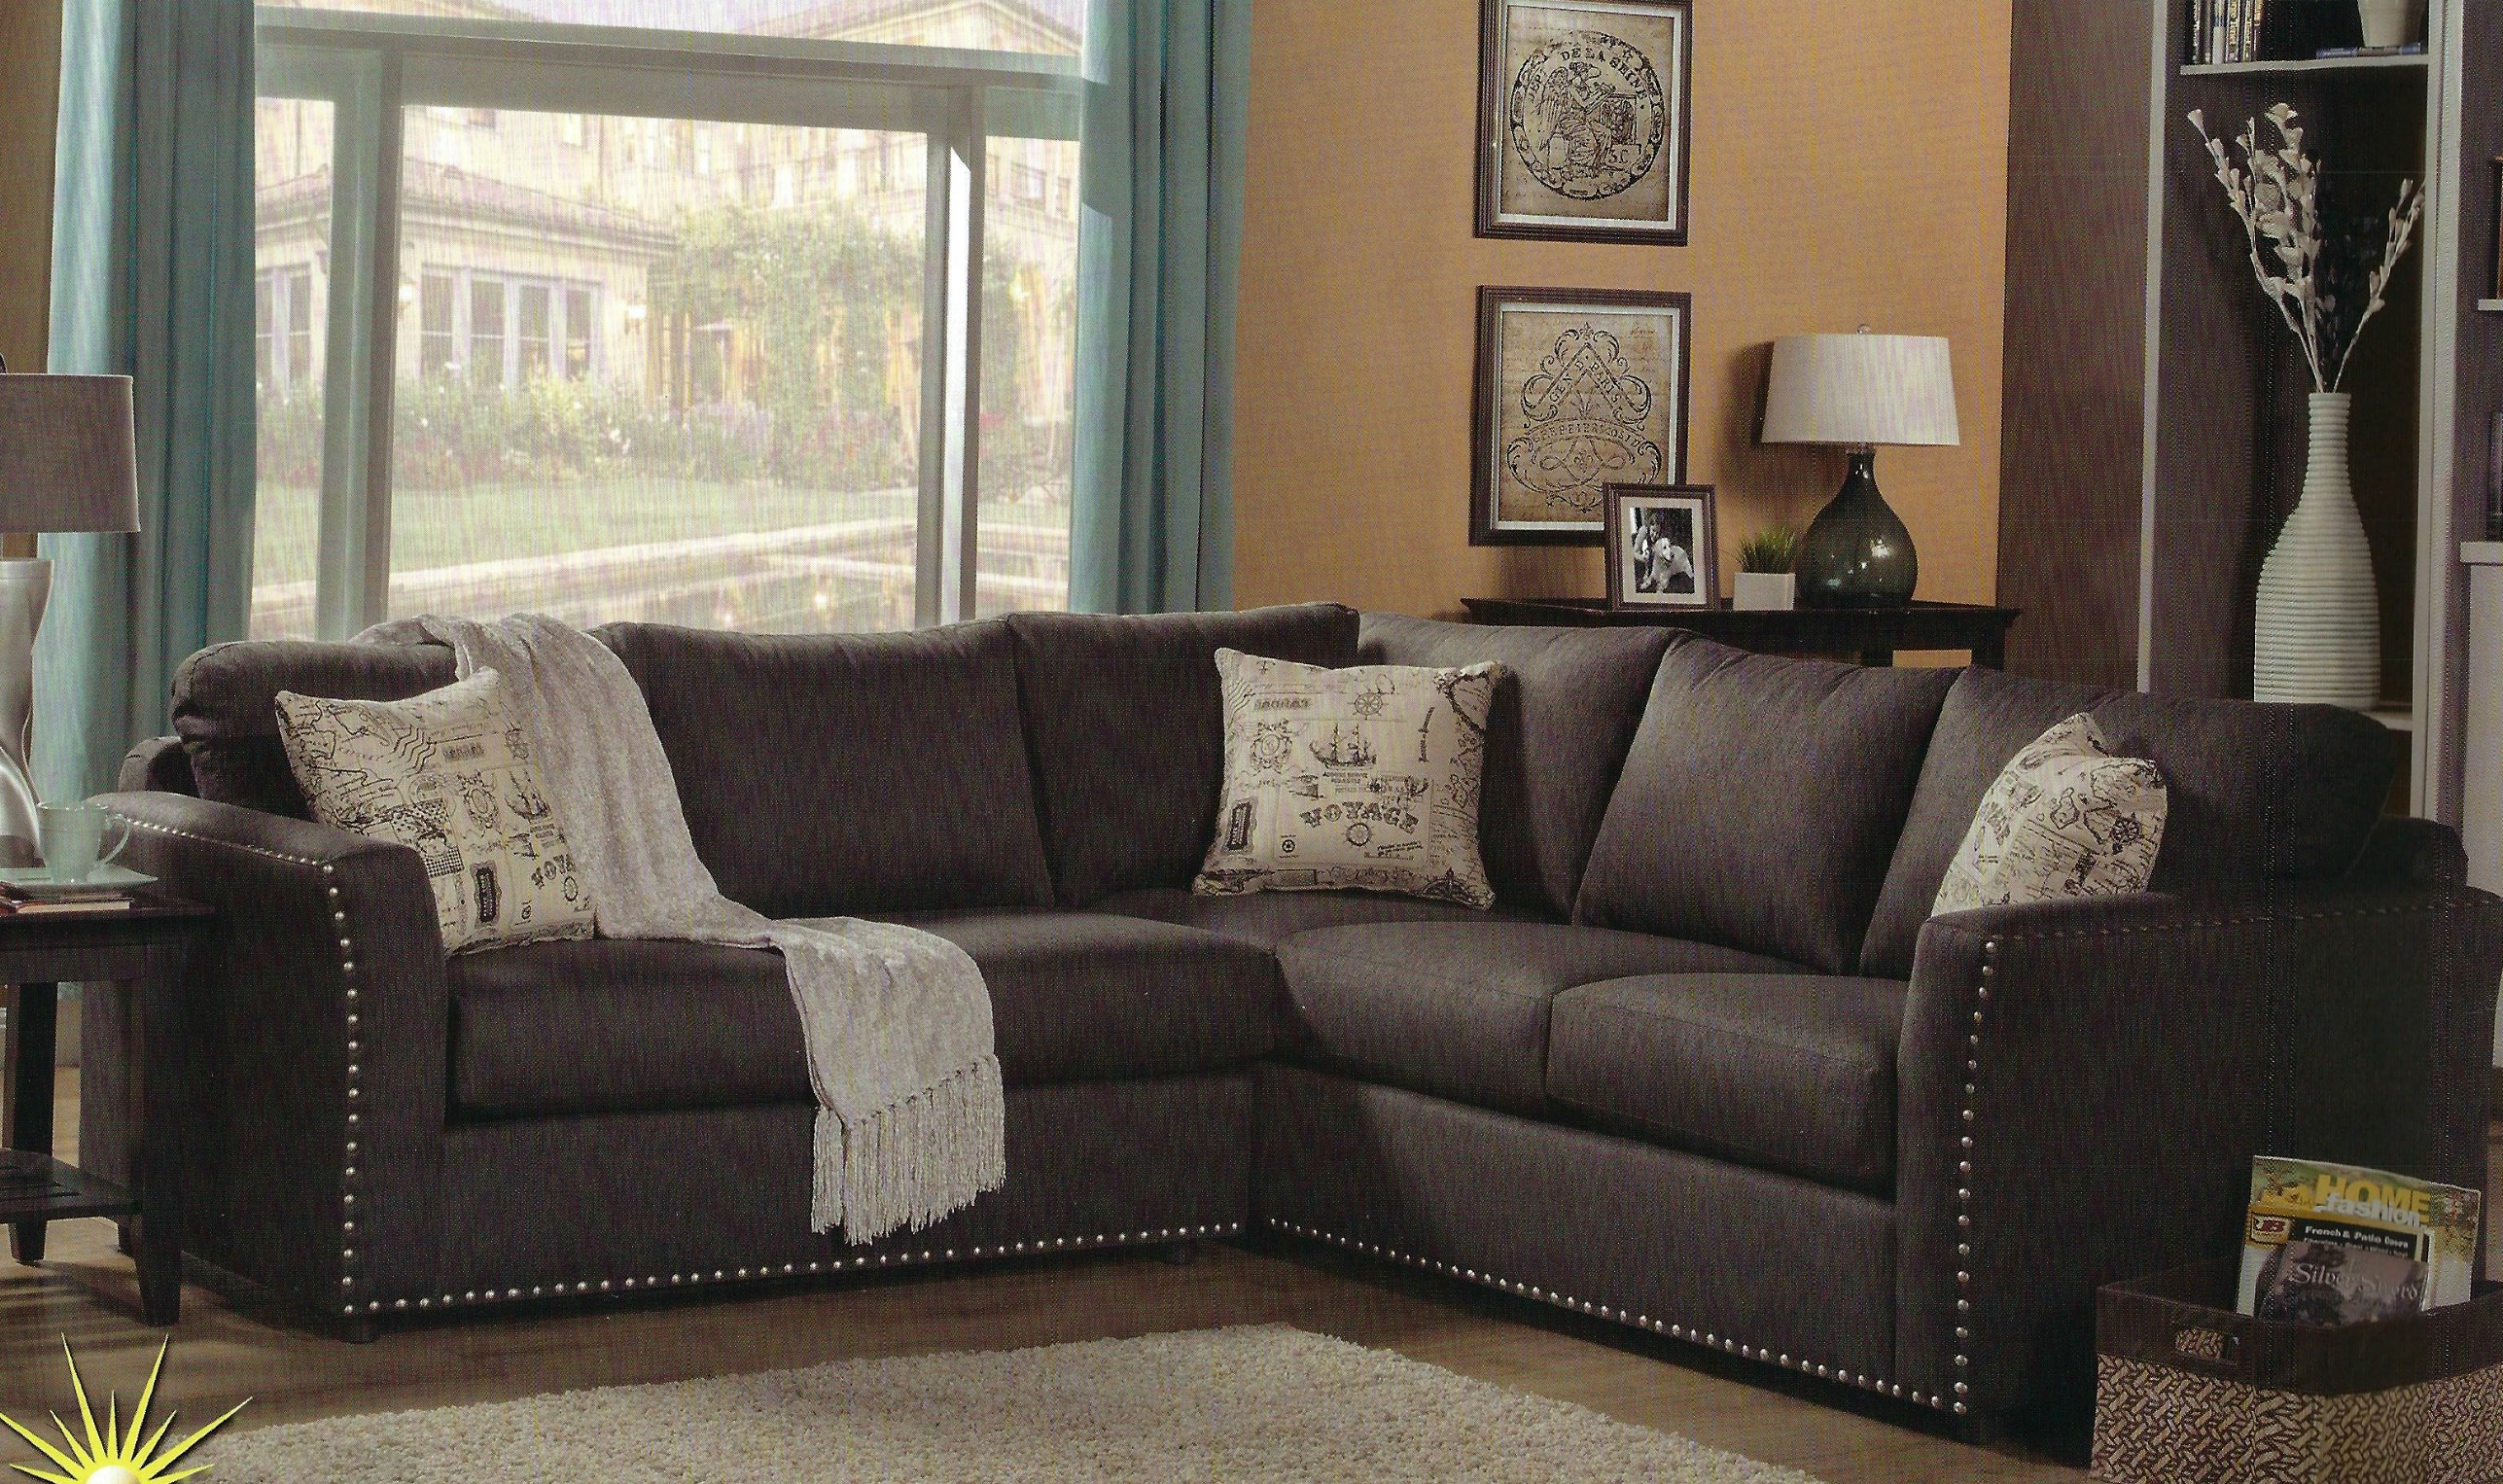 Marlow sectional